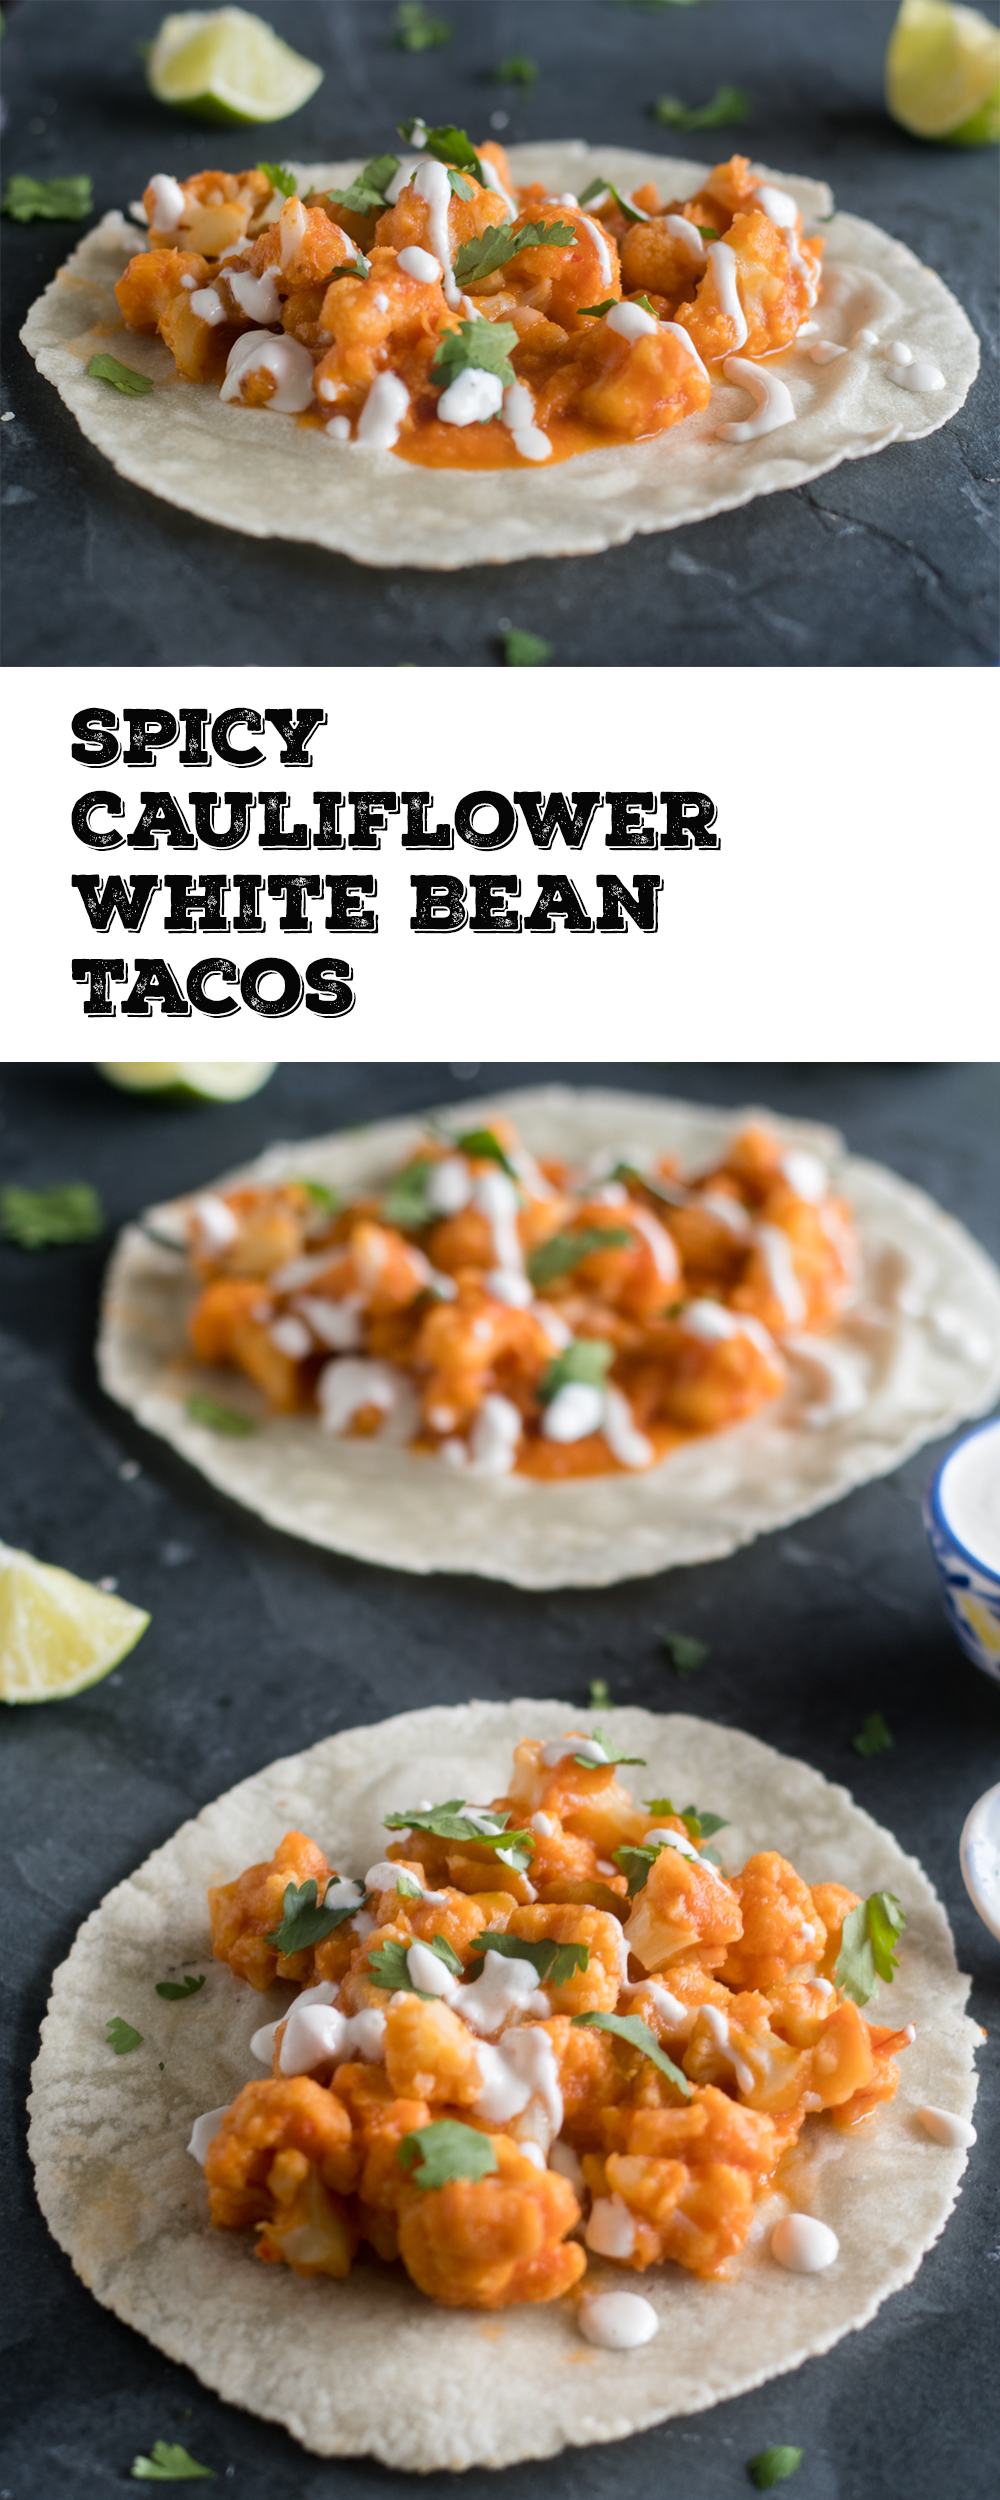 These Spicy Cauliflower and White Beans Tacos are so flavorful! Arbol chiles give these tacos a spicy kick! They are quick & easy to make too! 